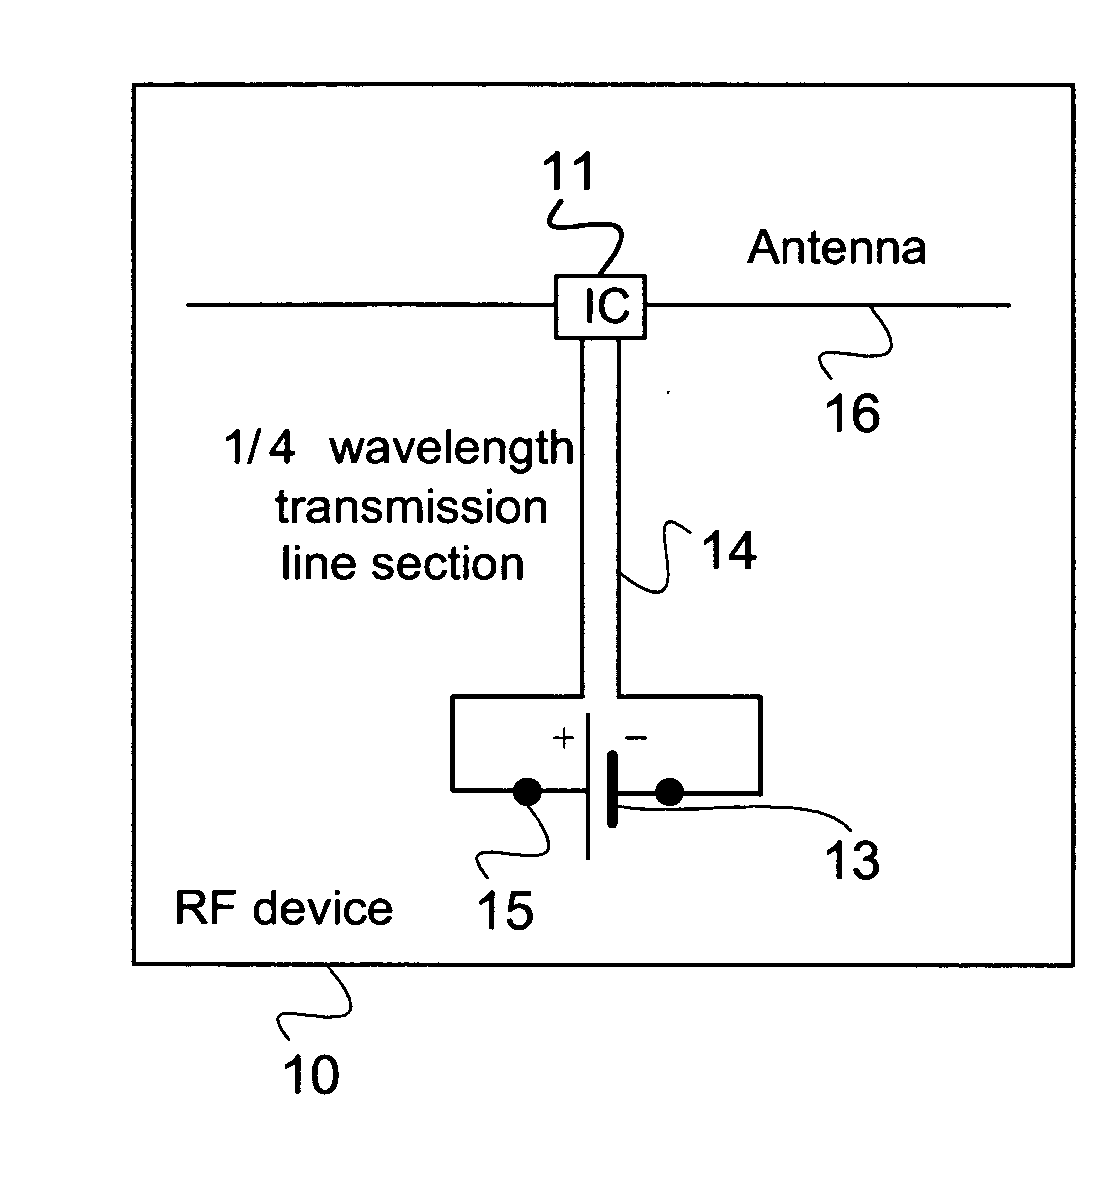 Method And Circuit For Providing RF Isolation Of A Power Source From An Antenna And An RFID Device Employing Such A Circuit